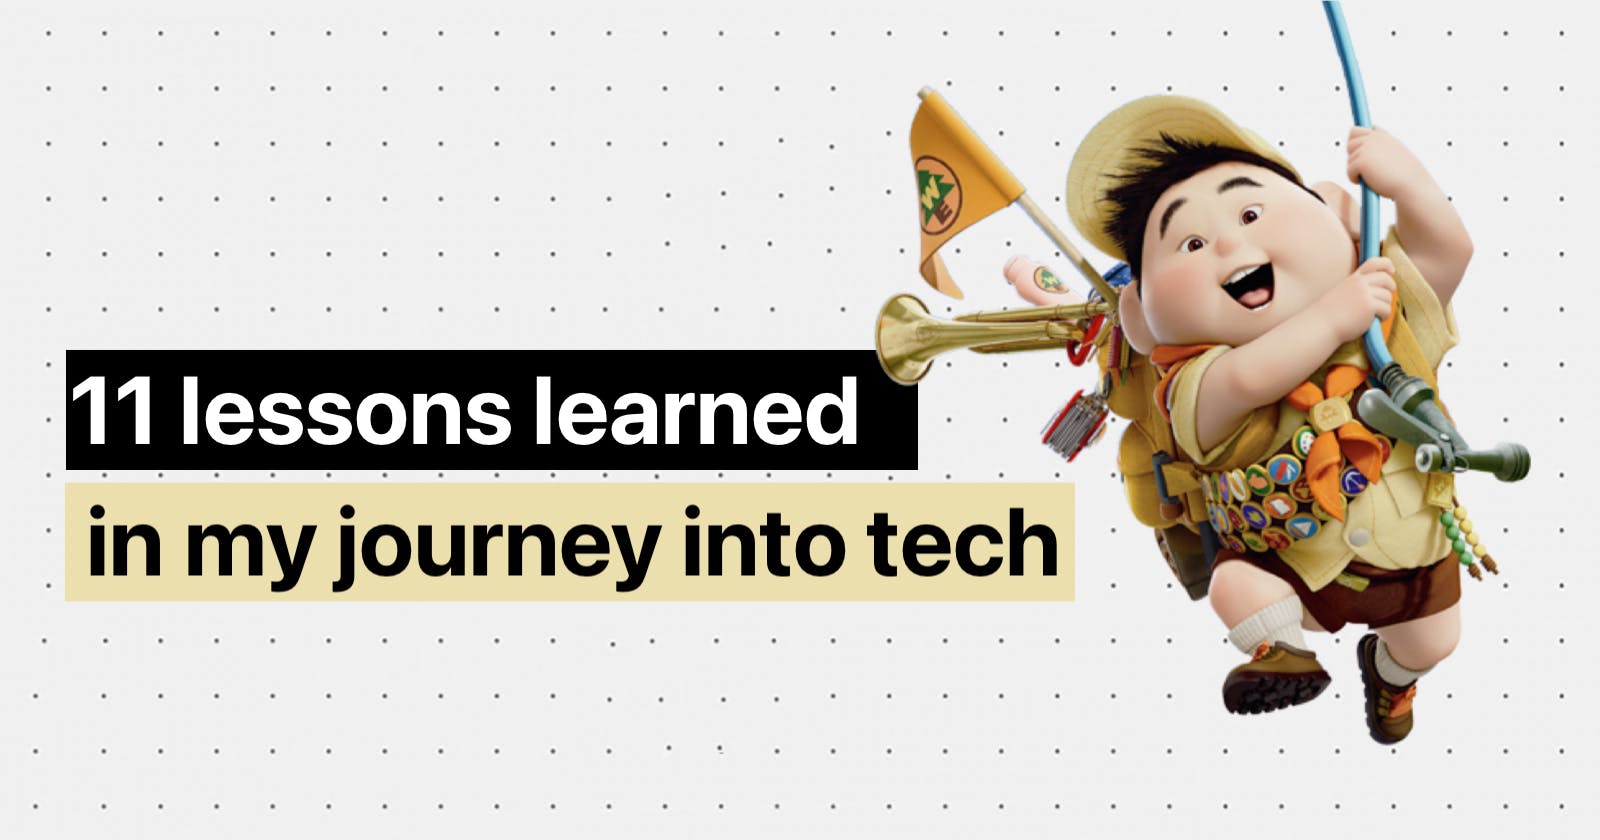 11 lessons learned in my journey into tech